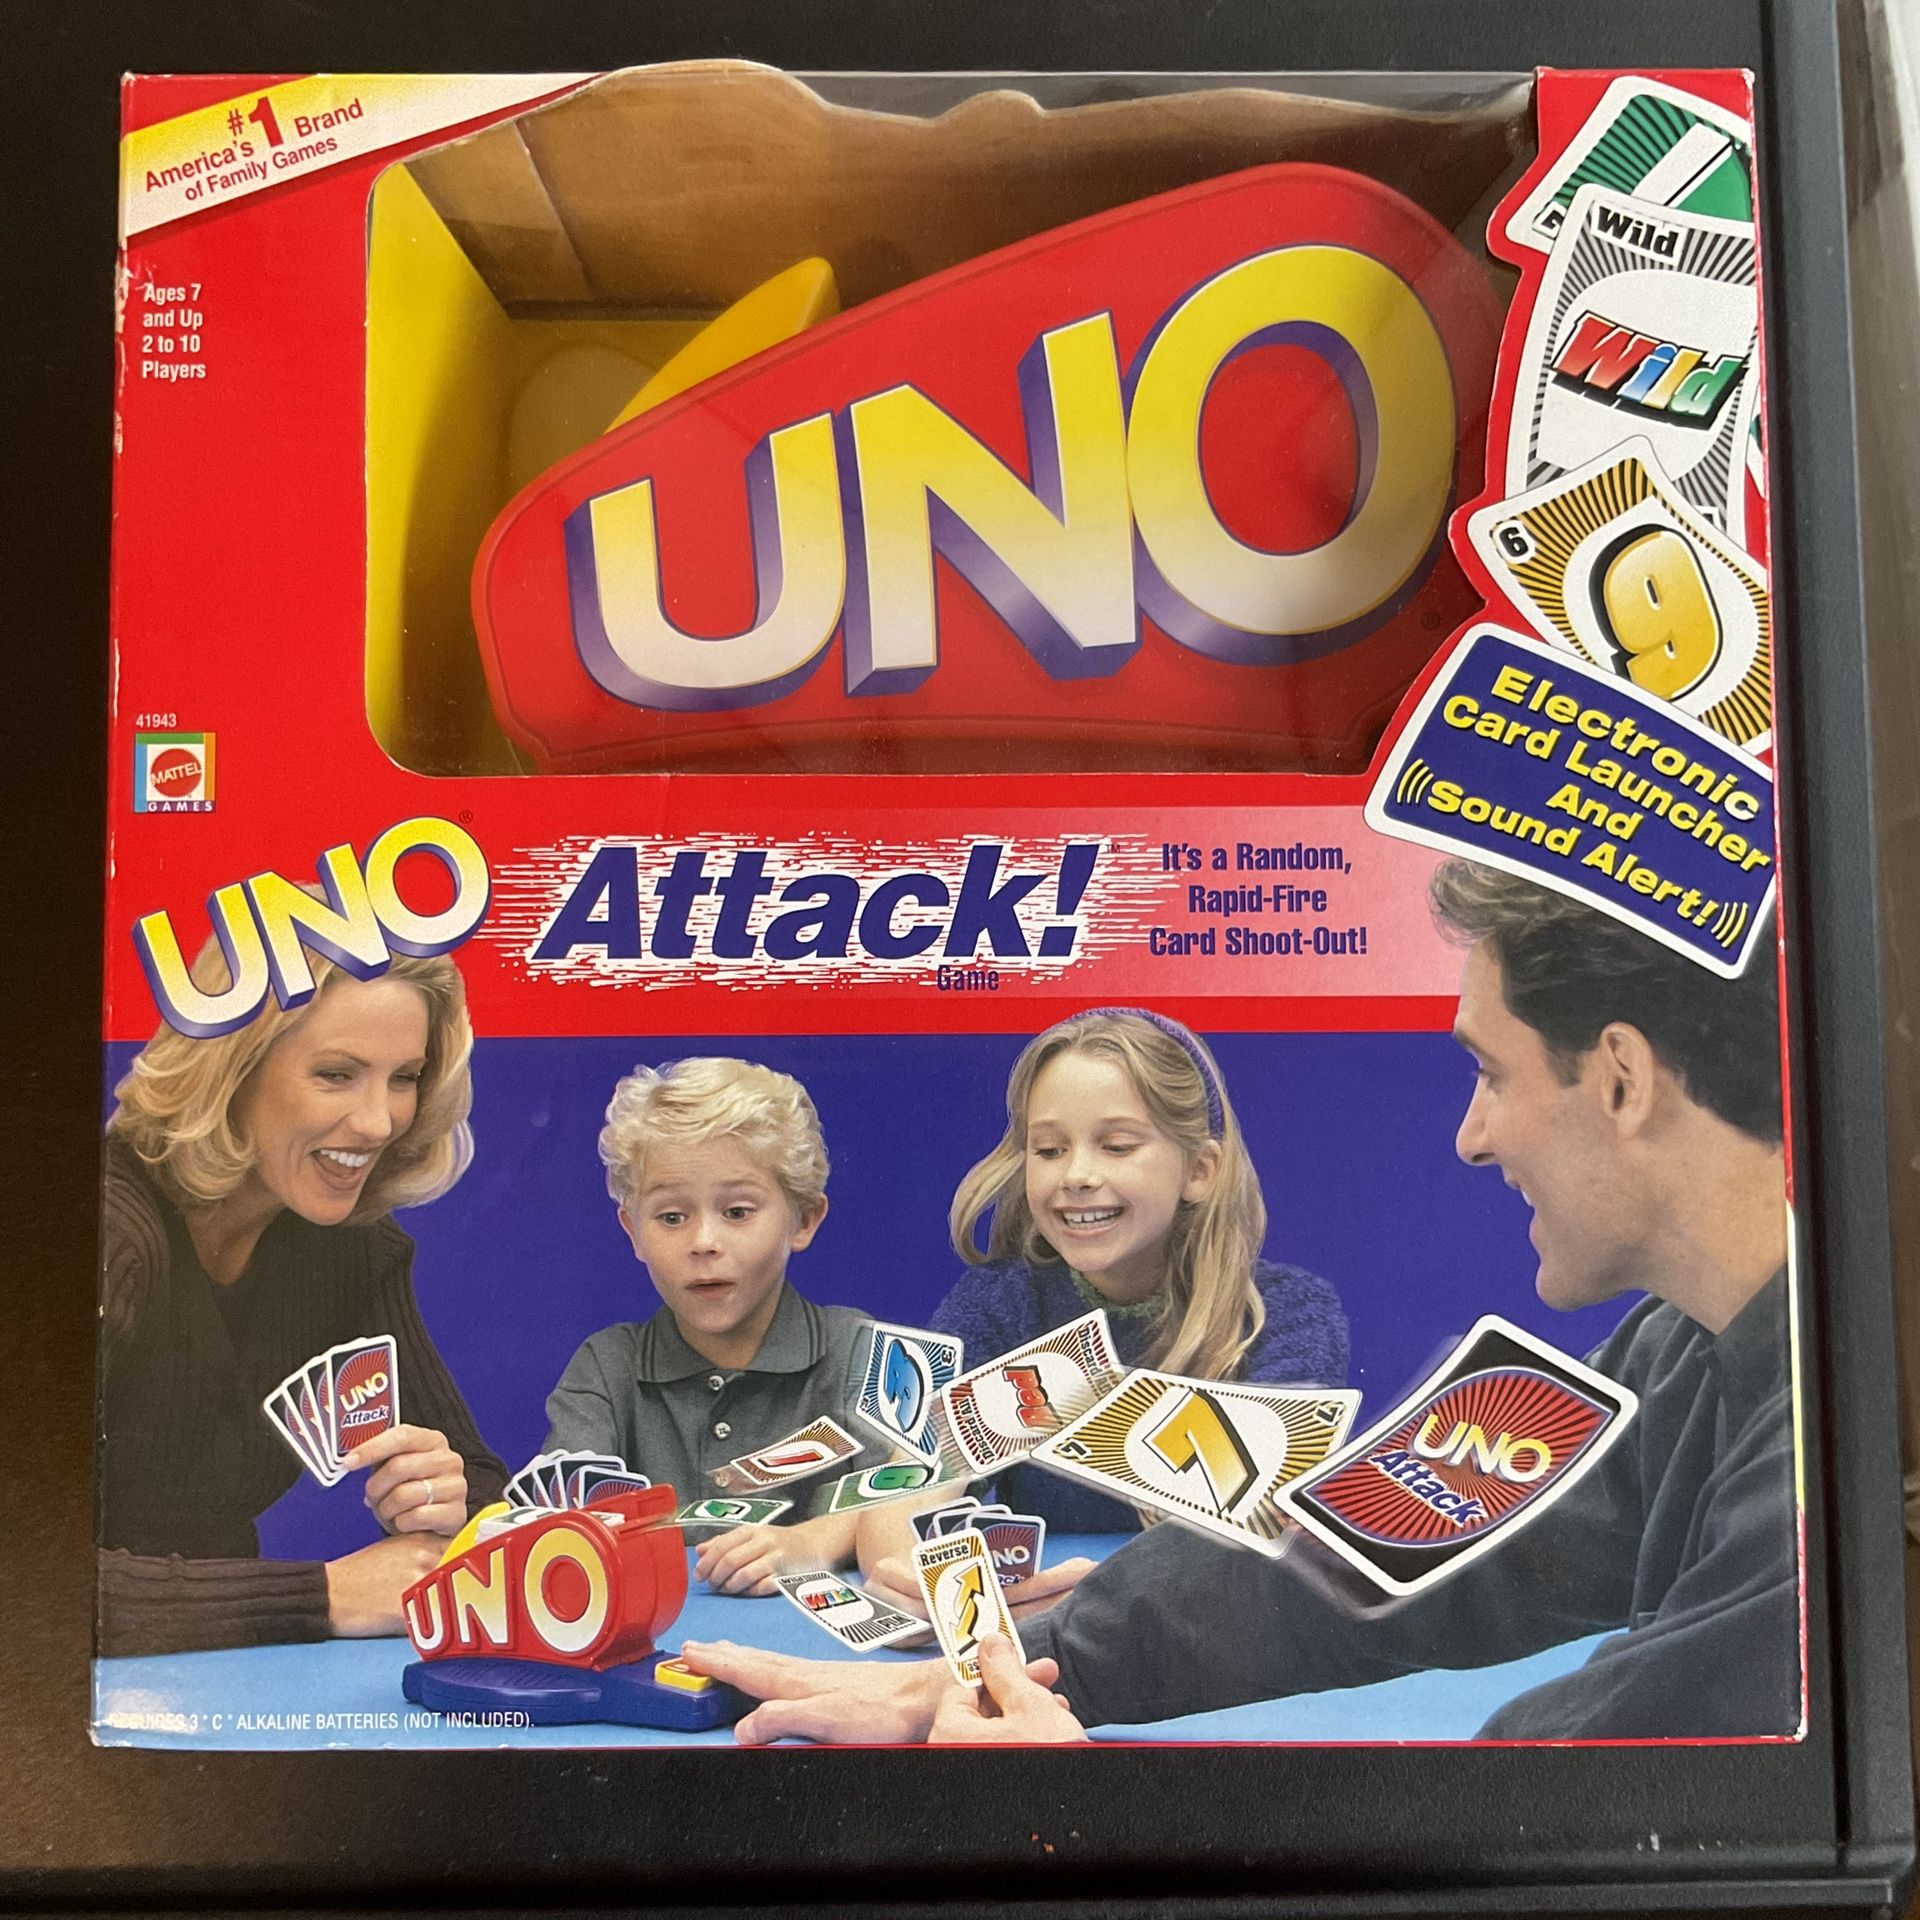  UNO Show 'em No Mercy Card Game for Kids, Adults